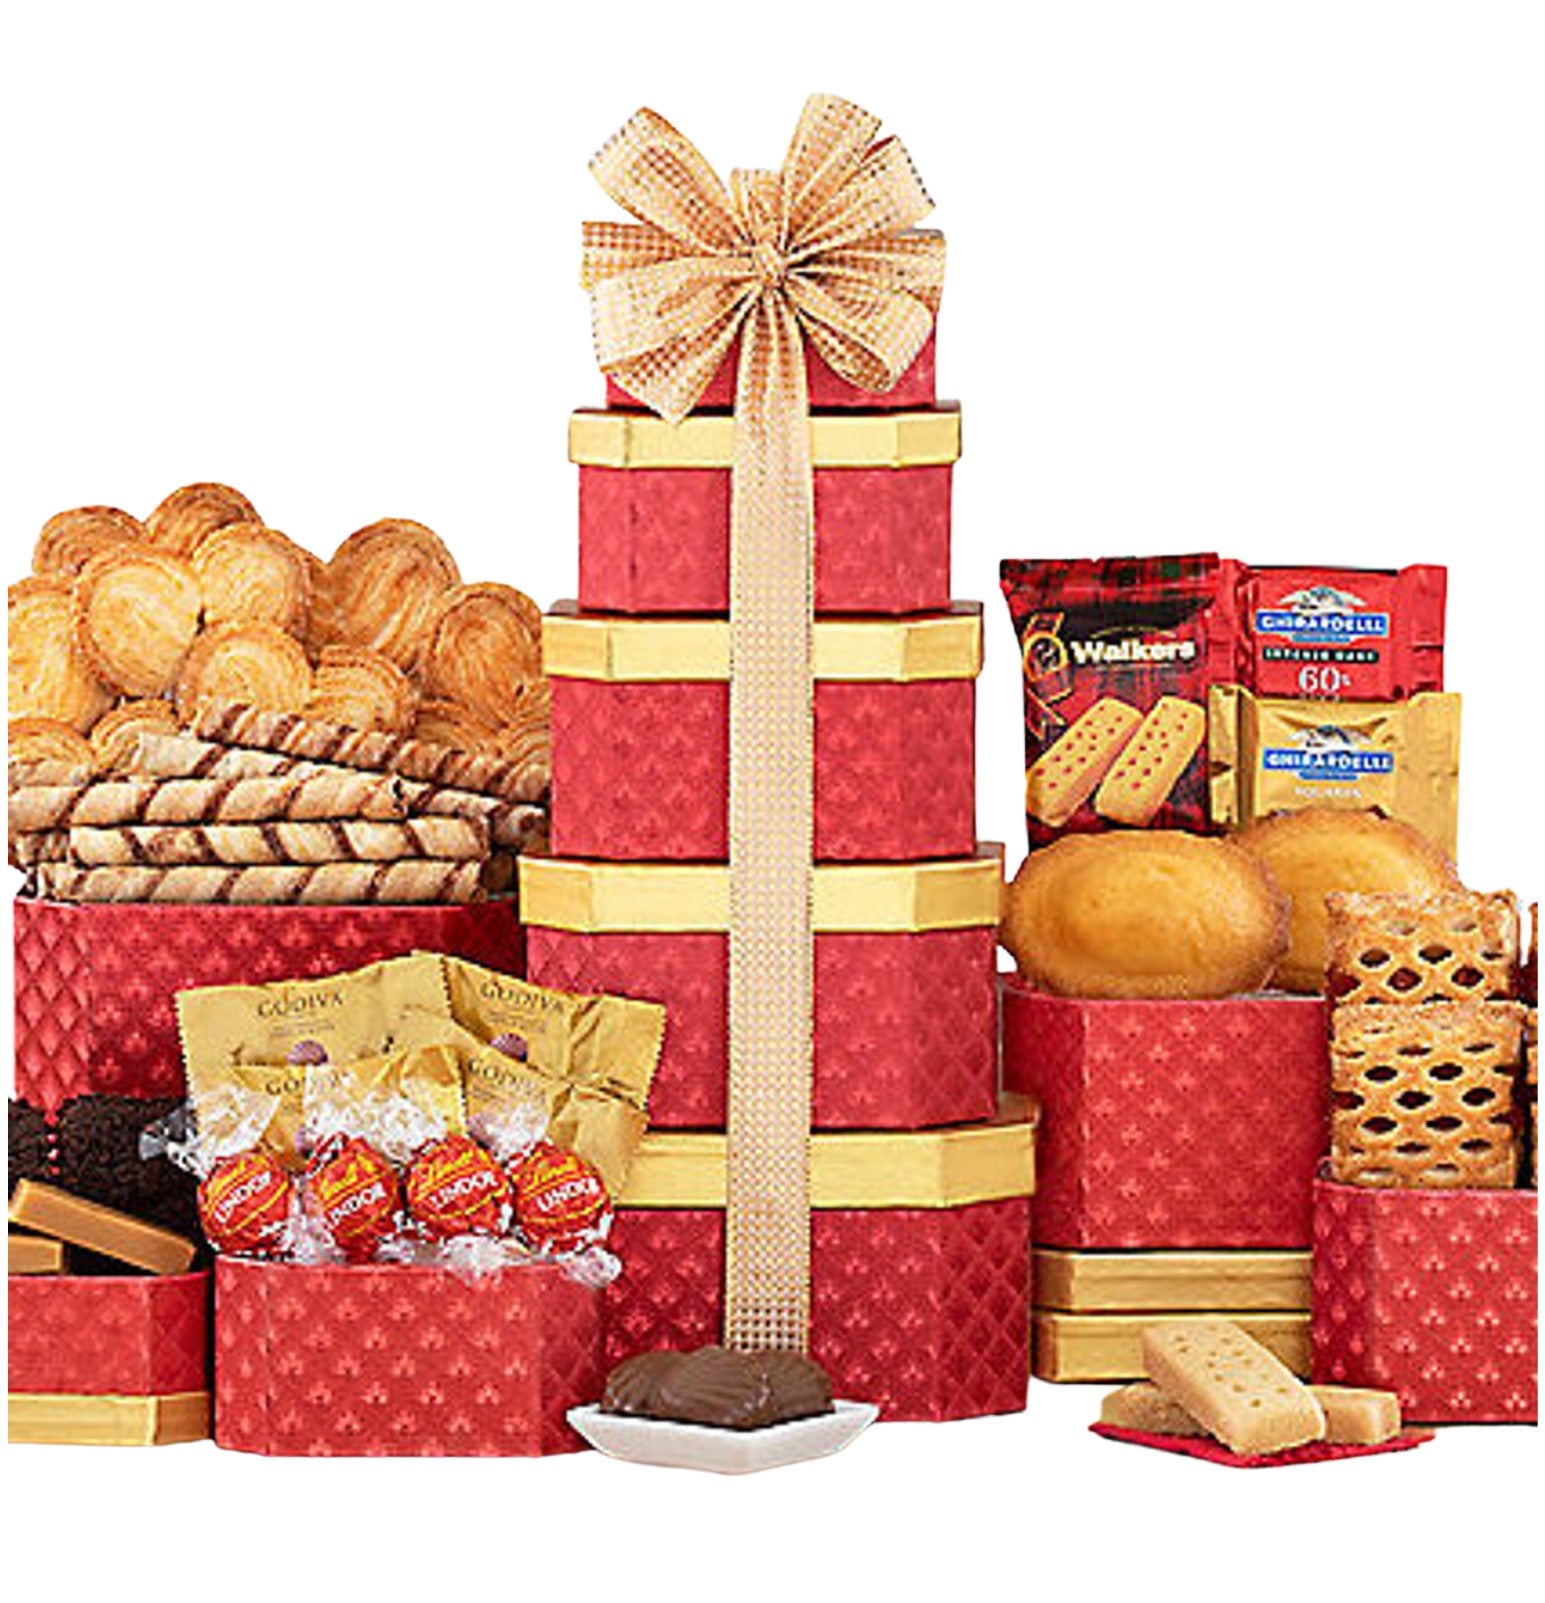 Gourmet Chocolate & Sweets Holiday Gift Tower - DJW Custom Baskets & Beyond